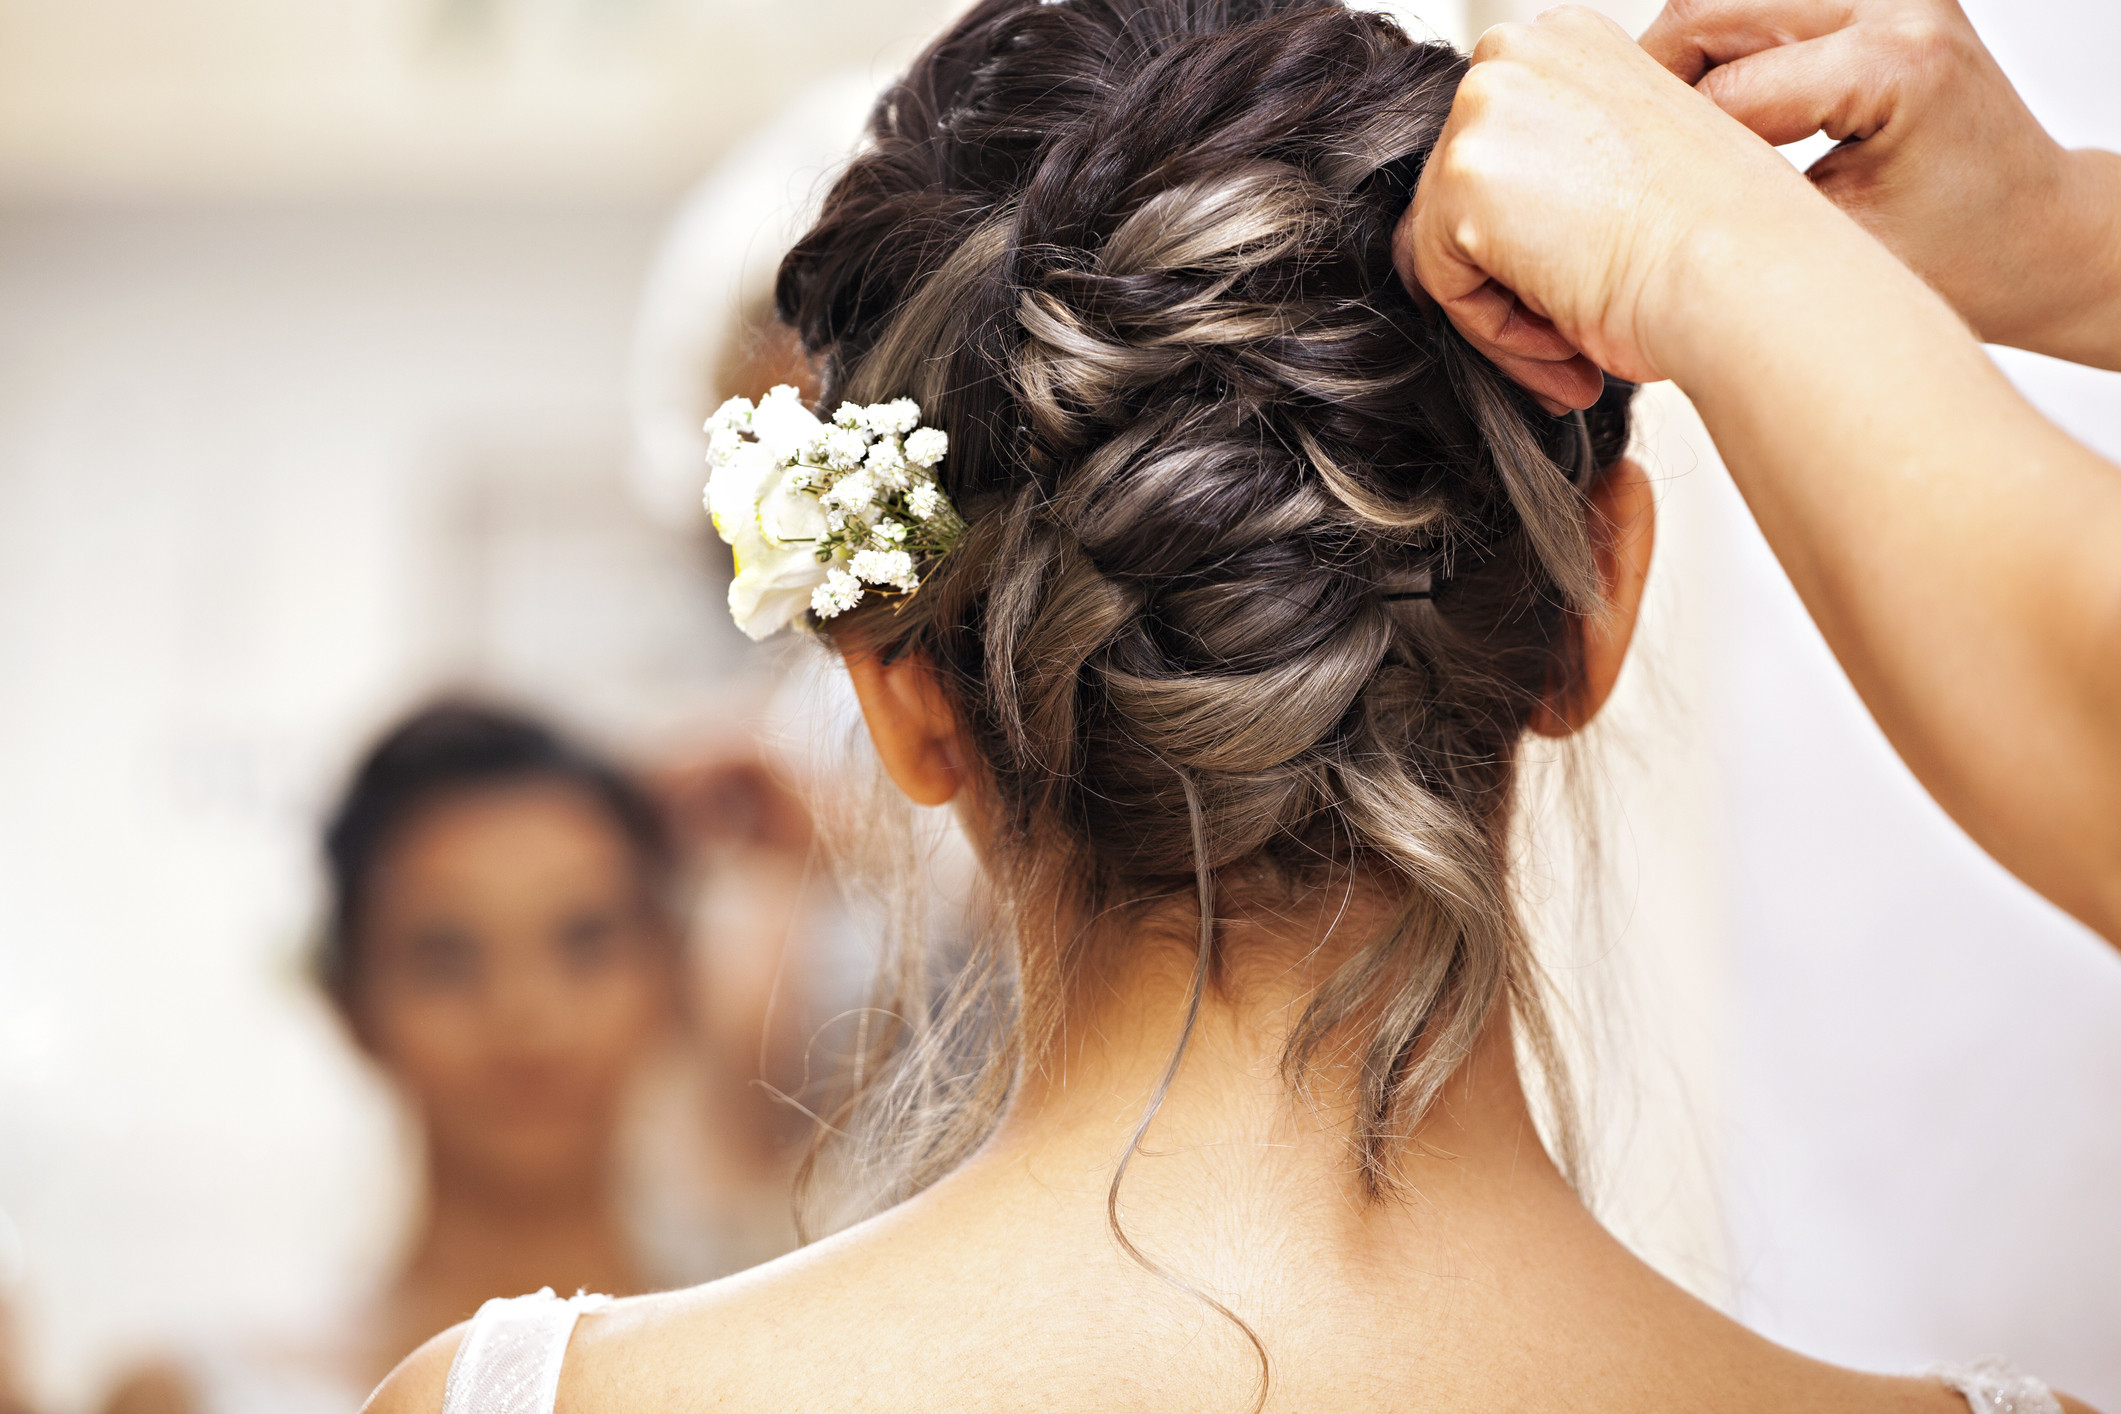 Image of brides hair done up